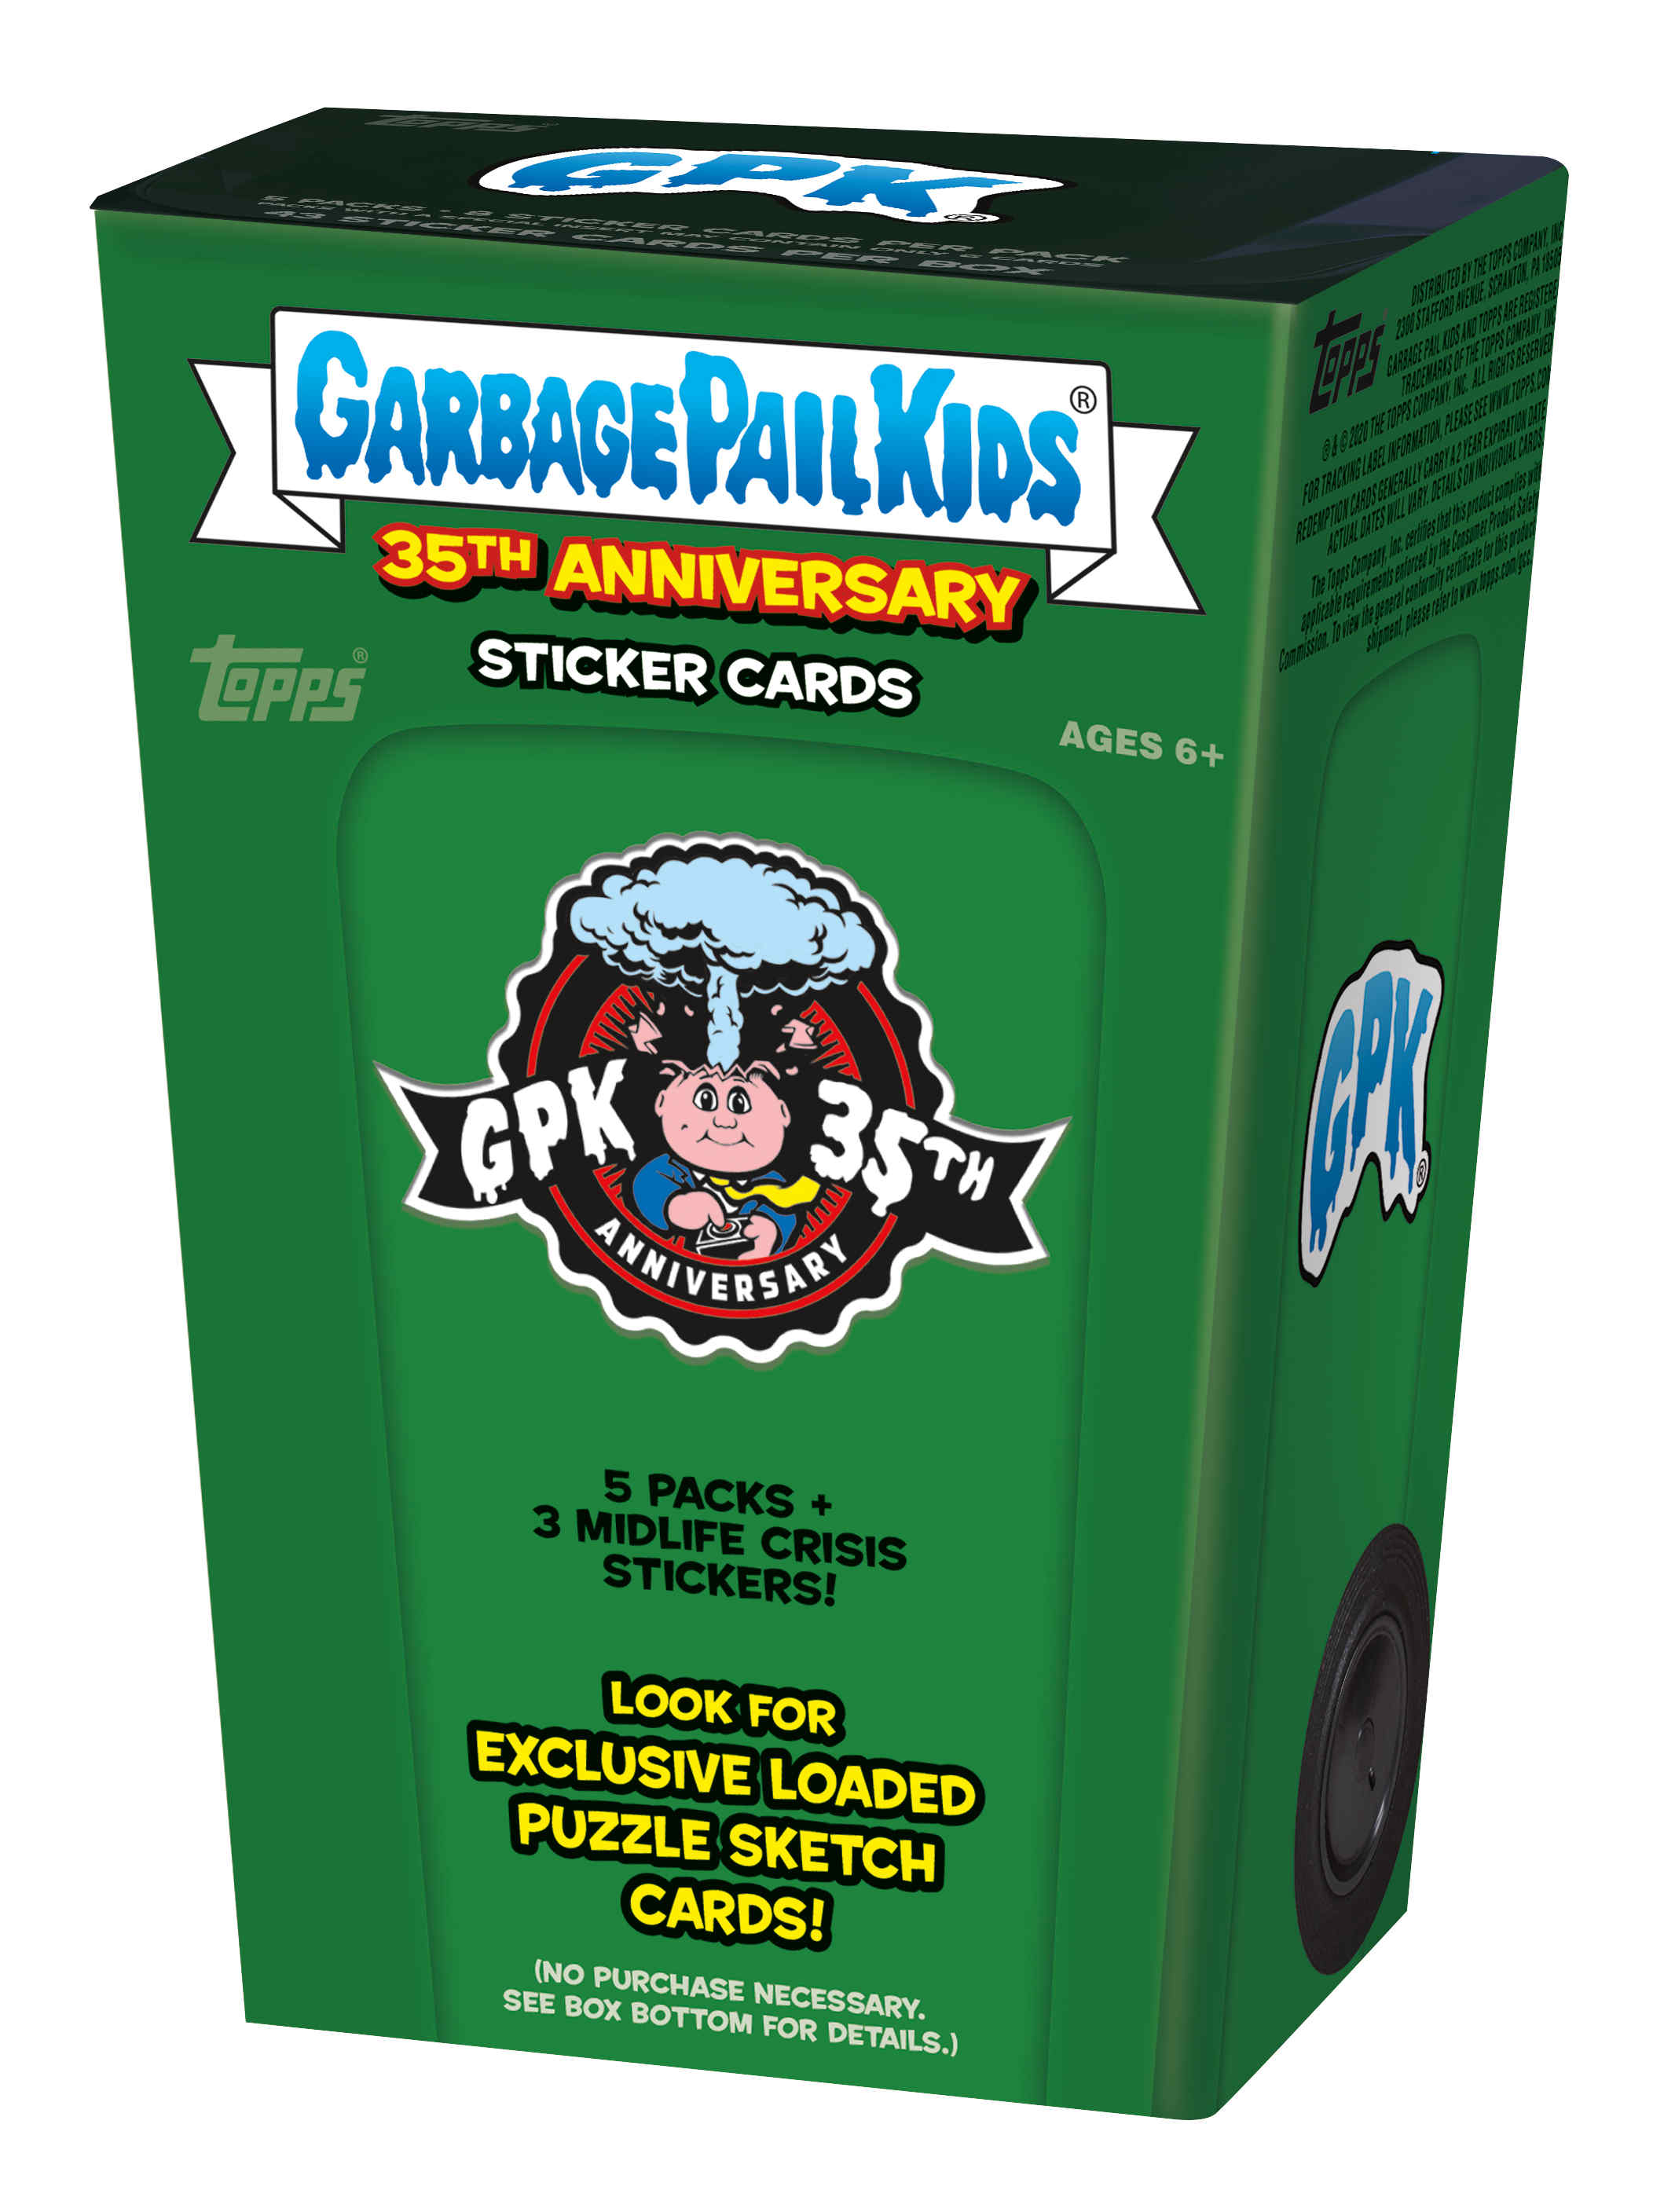 2020 Topps Garbage Pail Kids Series 2 35th Anniversary Blaster Box- 40 Cards + 1 cello Pack with three (3) Midlife Crisis Stickers - image 1 of 3